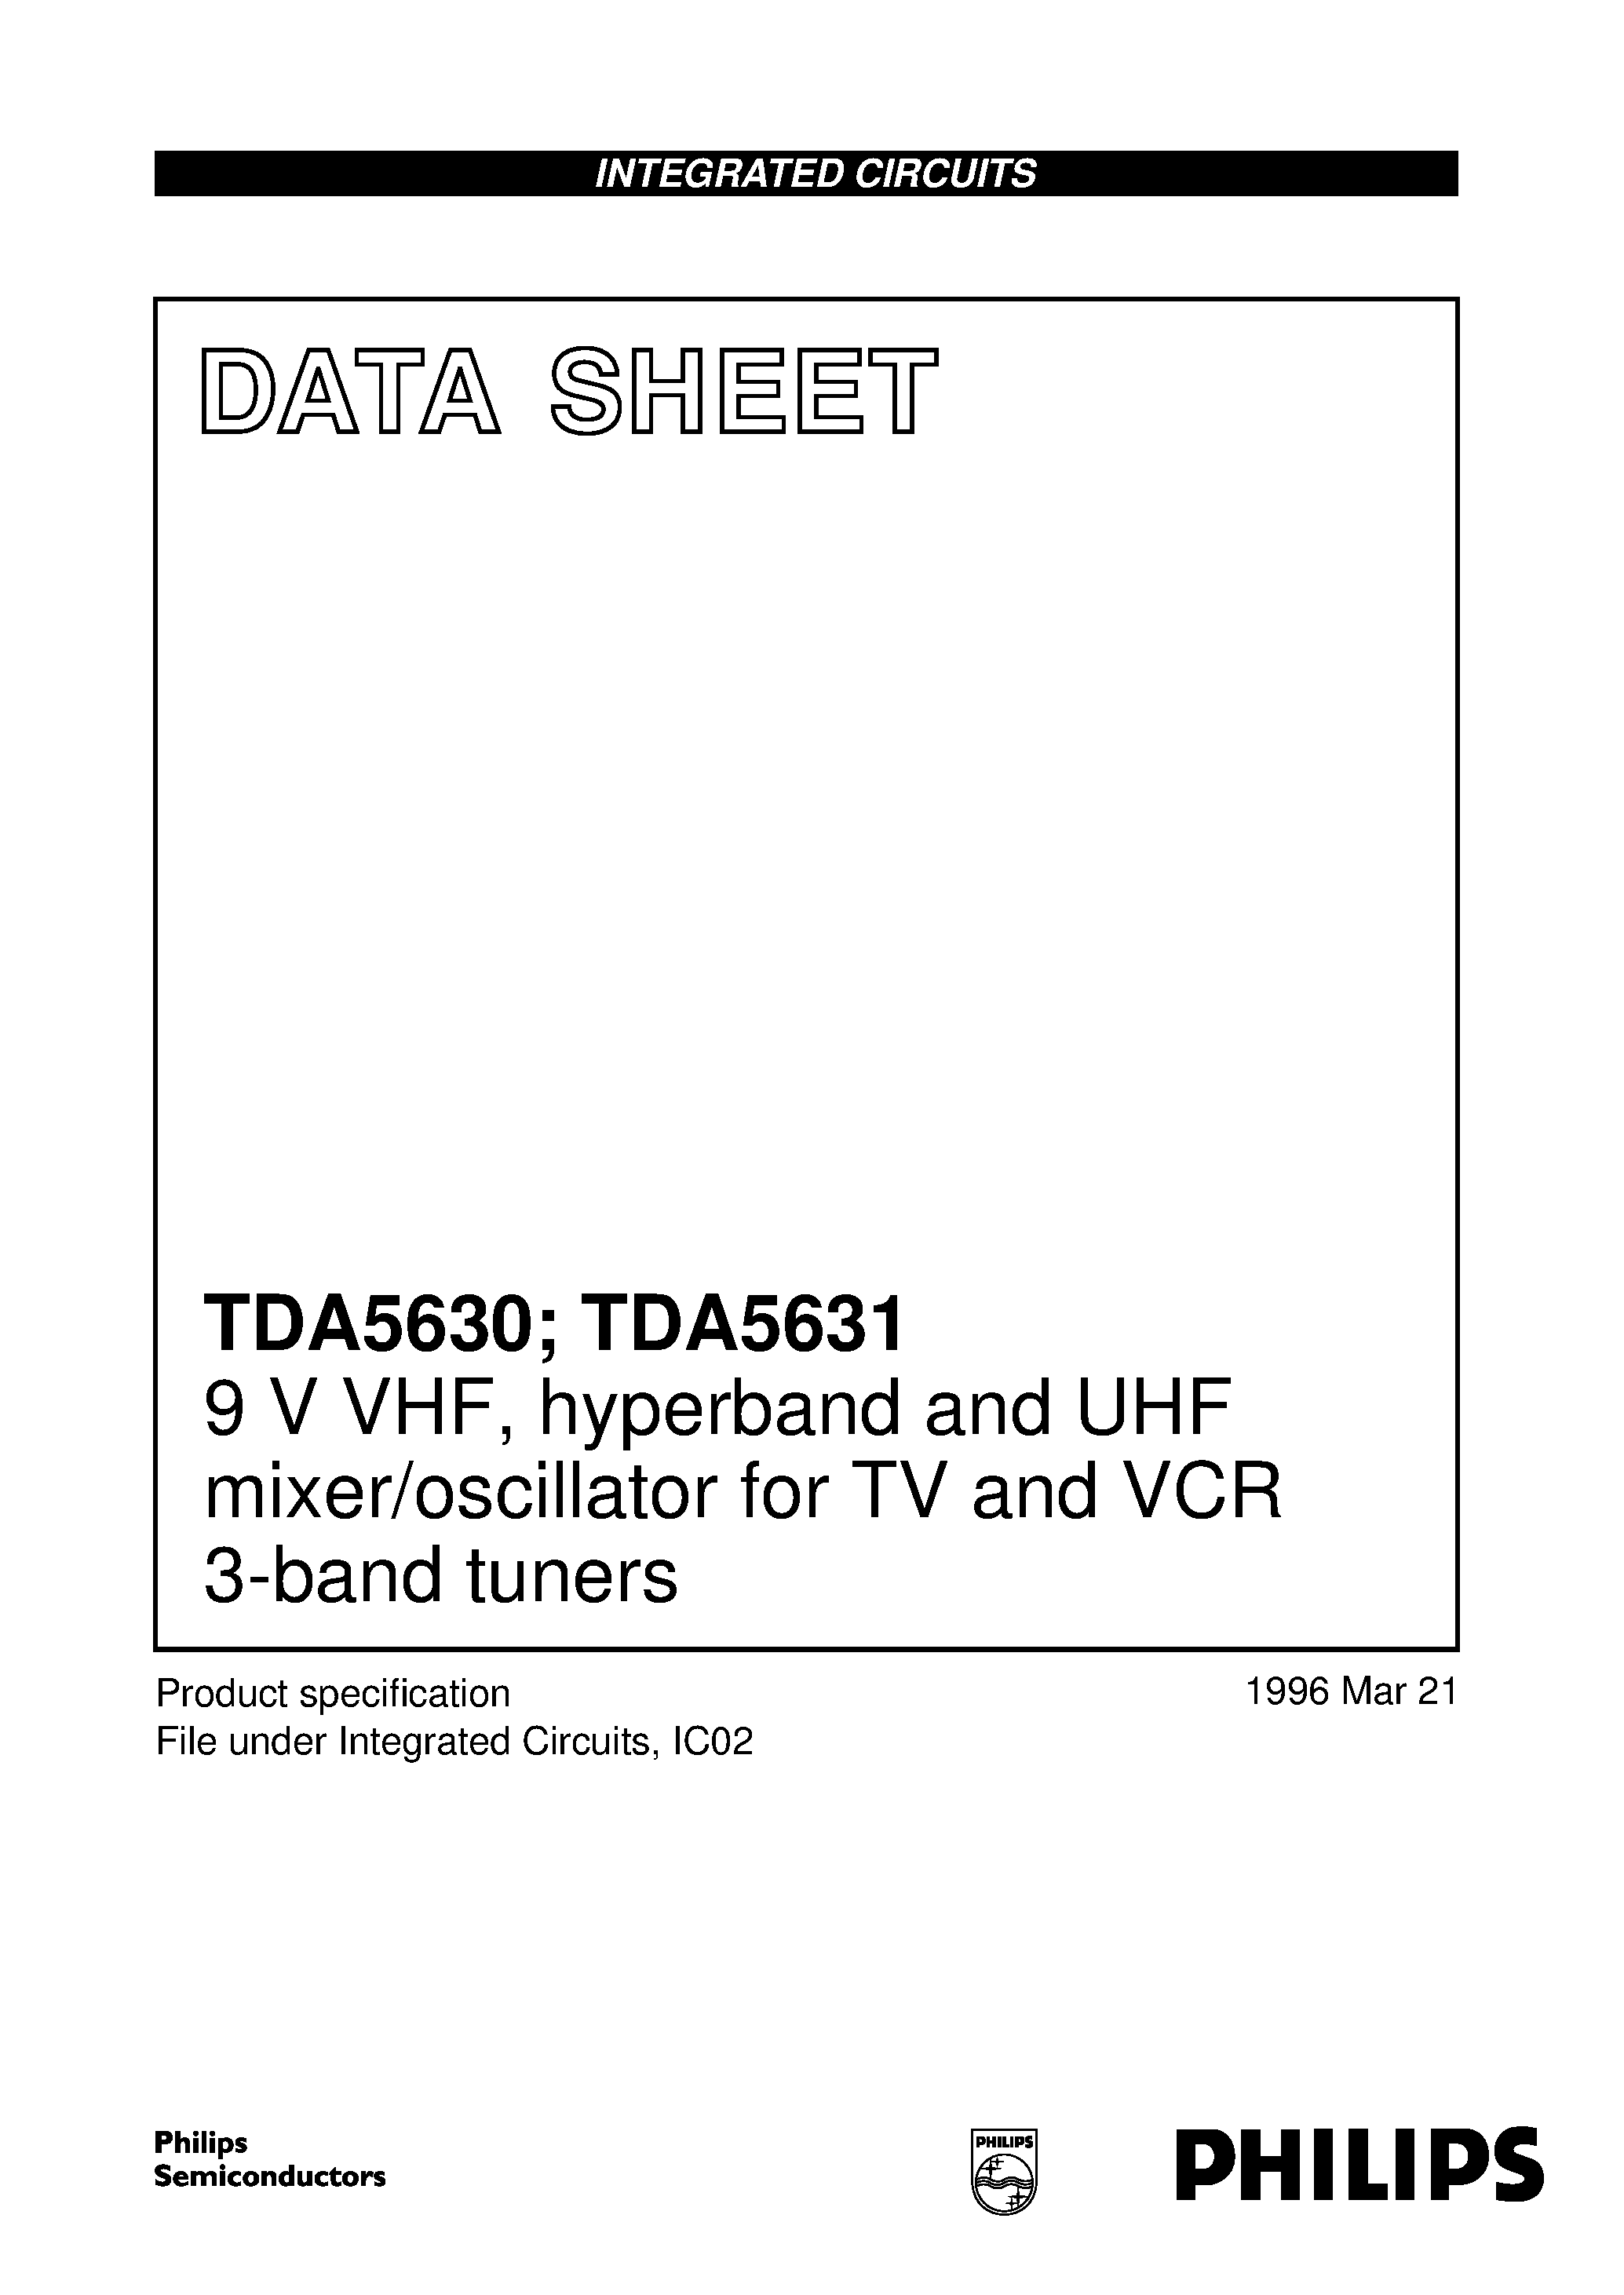 Datasheet TDA5630M - 9 V VHF/ hyperband and UHF mixer/oscillator for TV and VCR 3-band tuners page 1